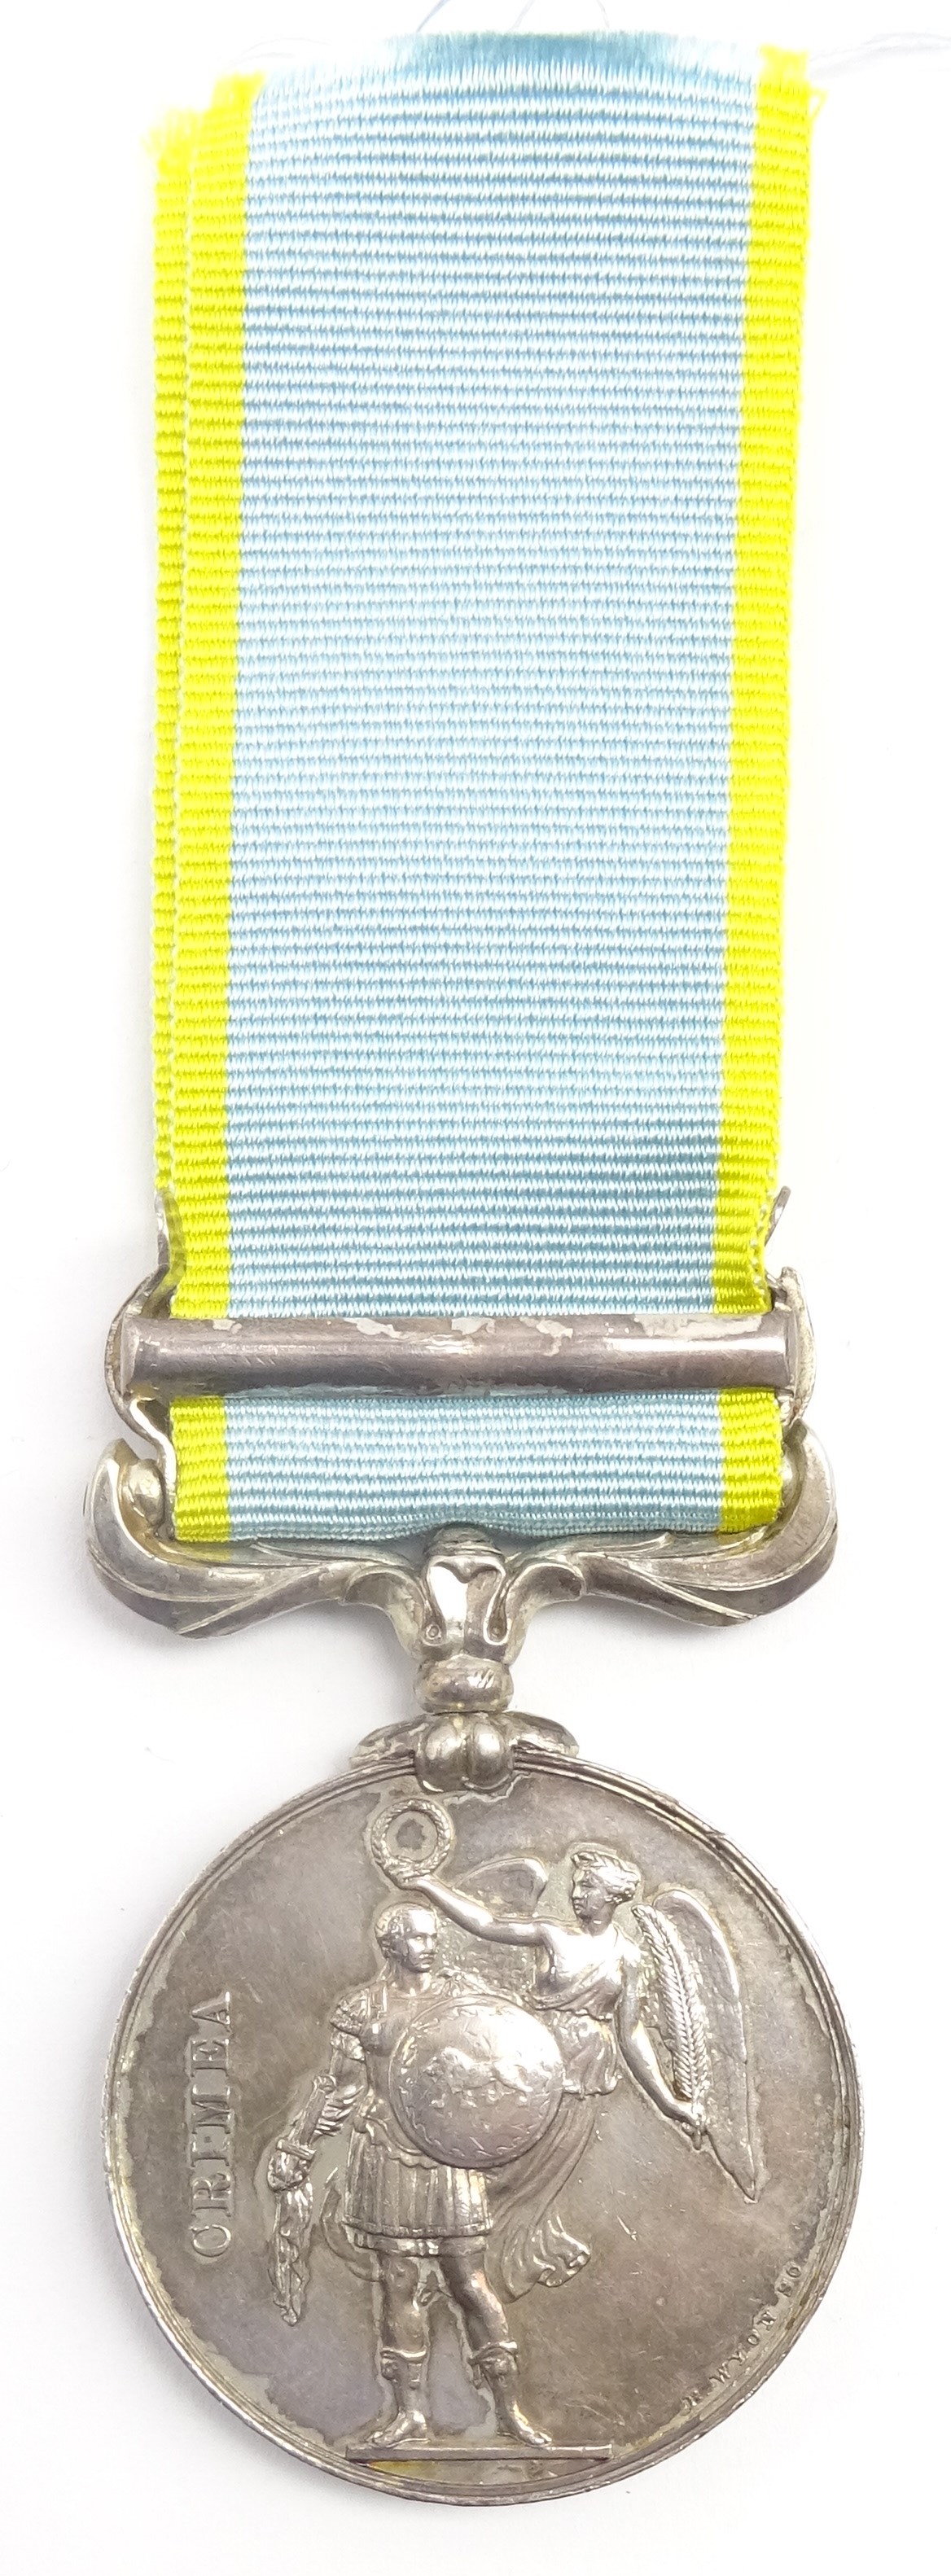 Victorian Crimea medal awarded to R. Thomson 71st Regt. - Image 2 of 3